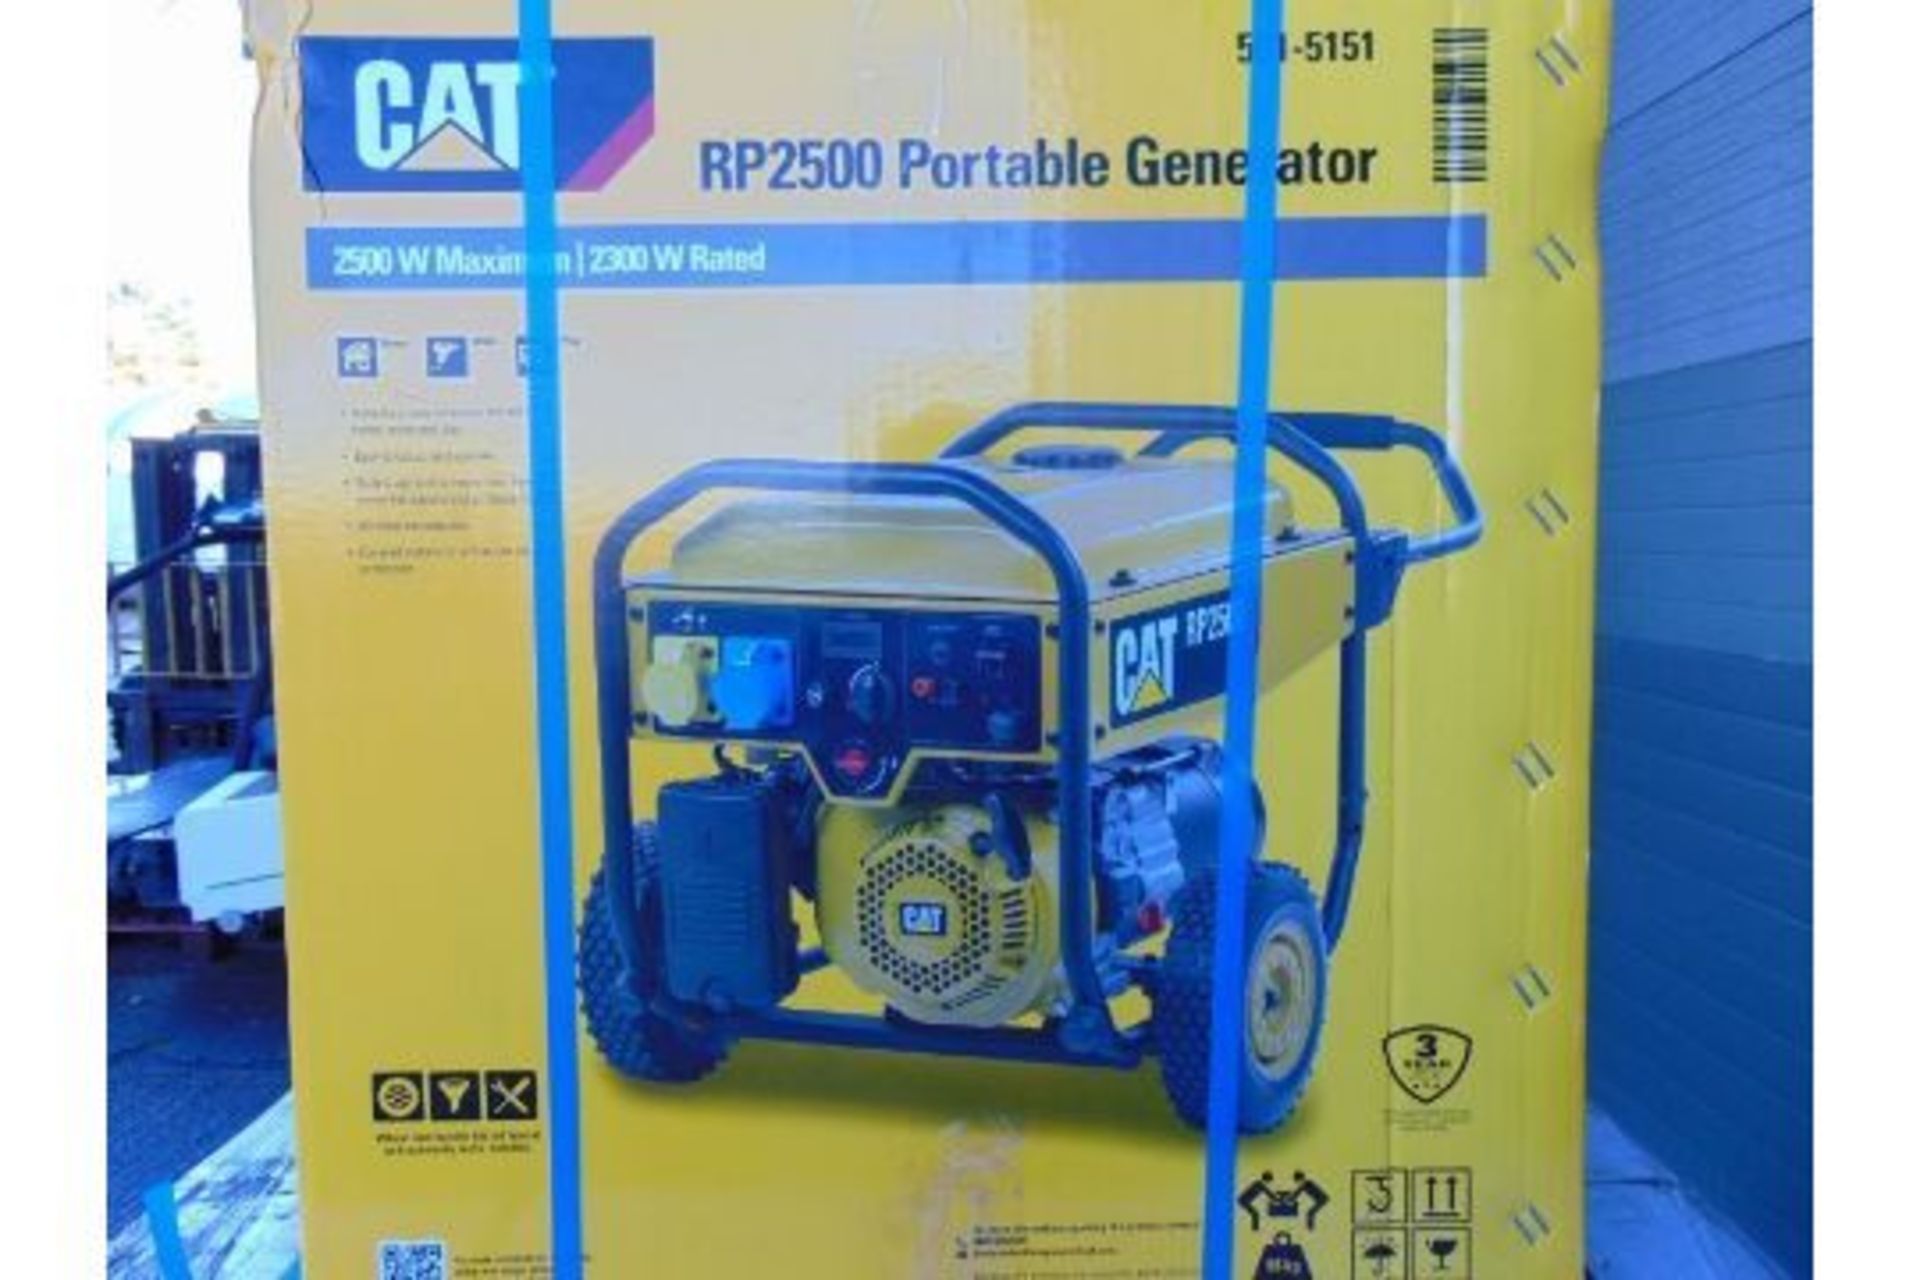 NEW and UNISSUED Caterpillar RP2500 (3.1 KVA) Industrial Petrol Generator Set - Image 4 of 5